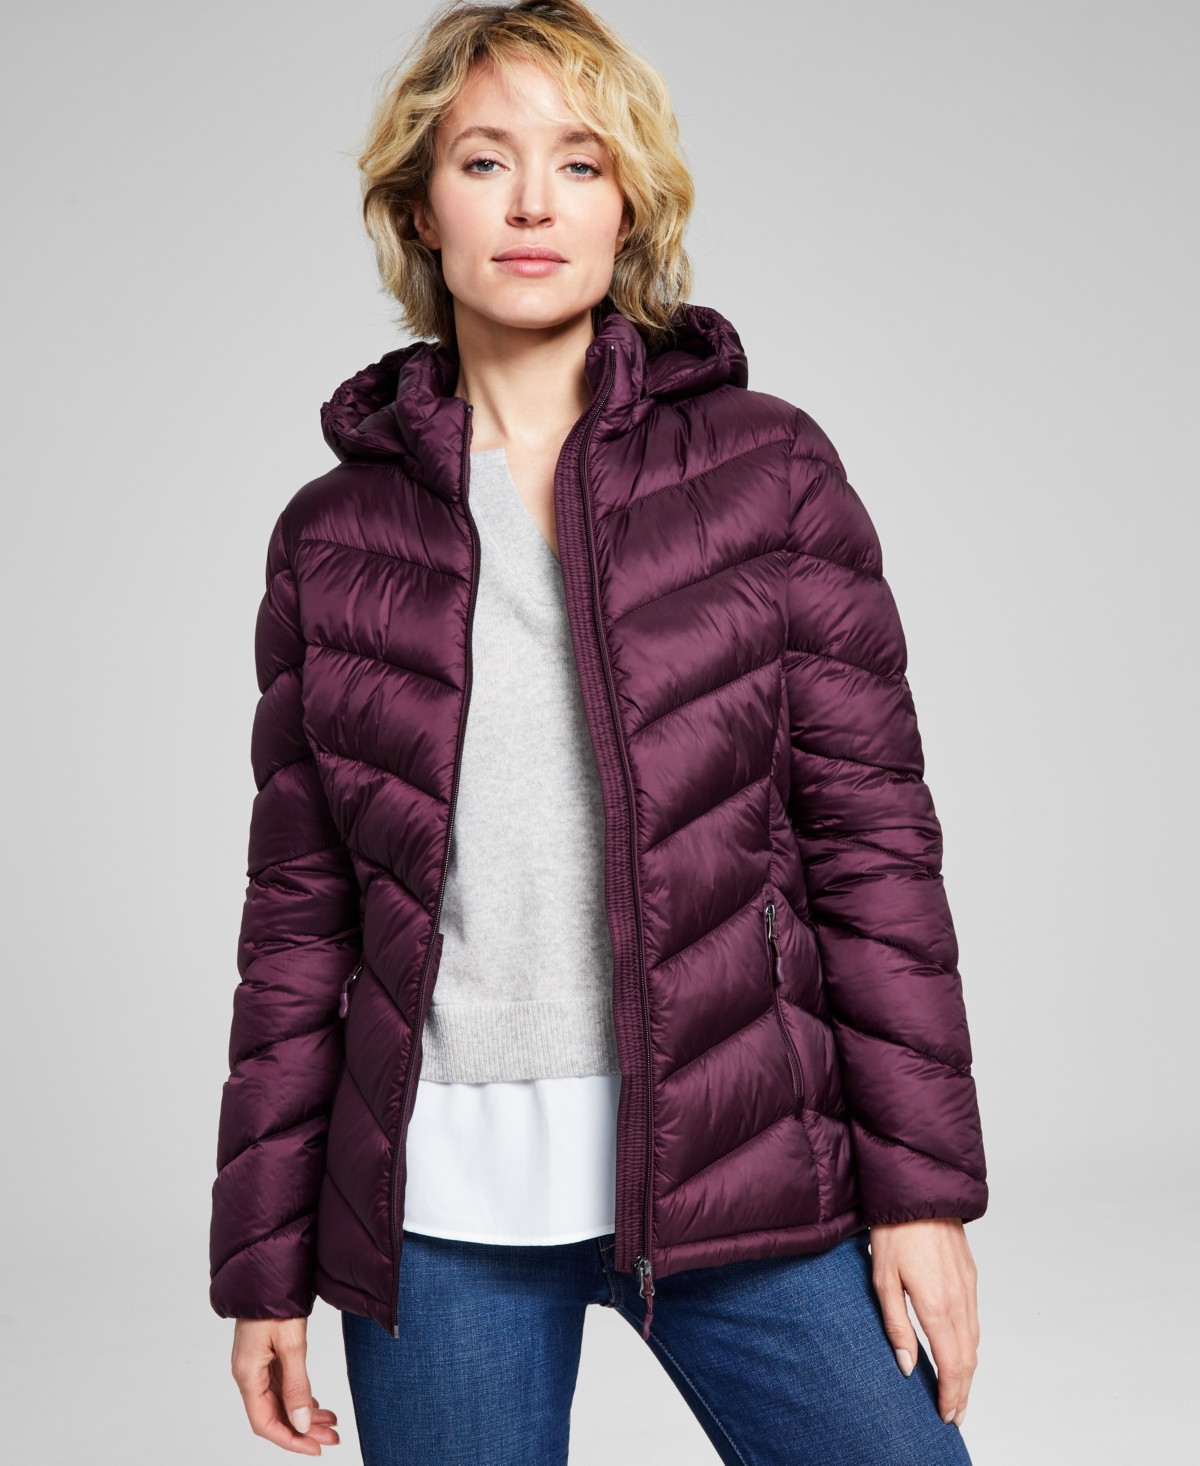 Women's Packable Hooded Puffer Coat, Created for Macy's - Taupe